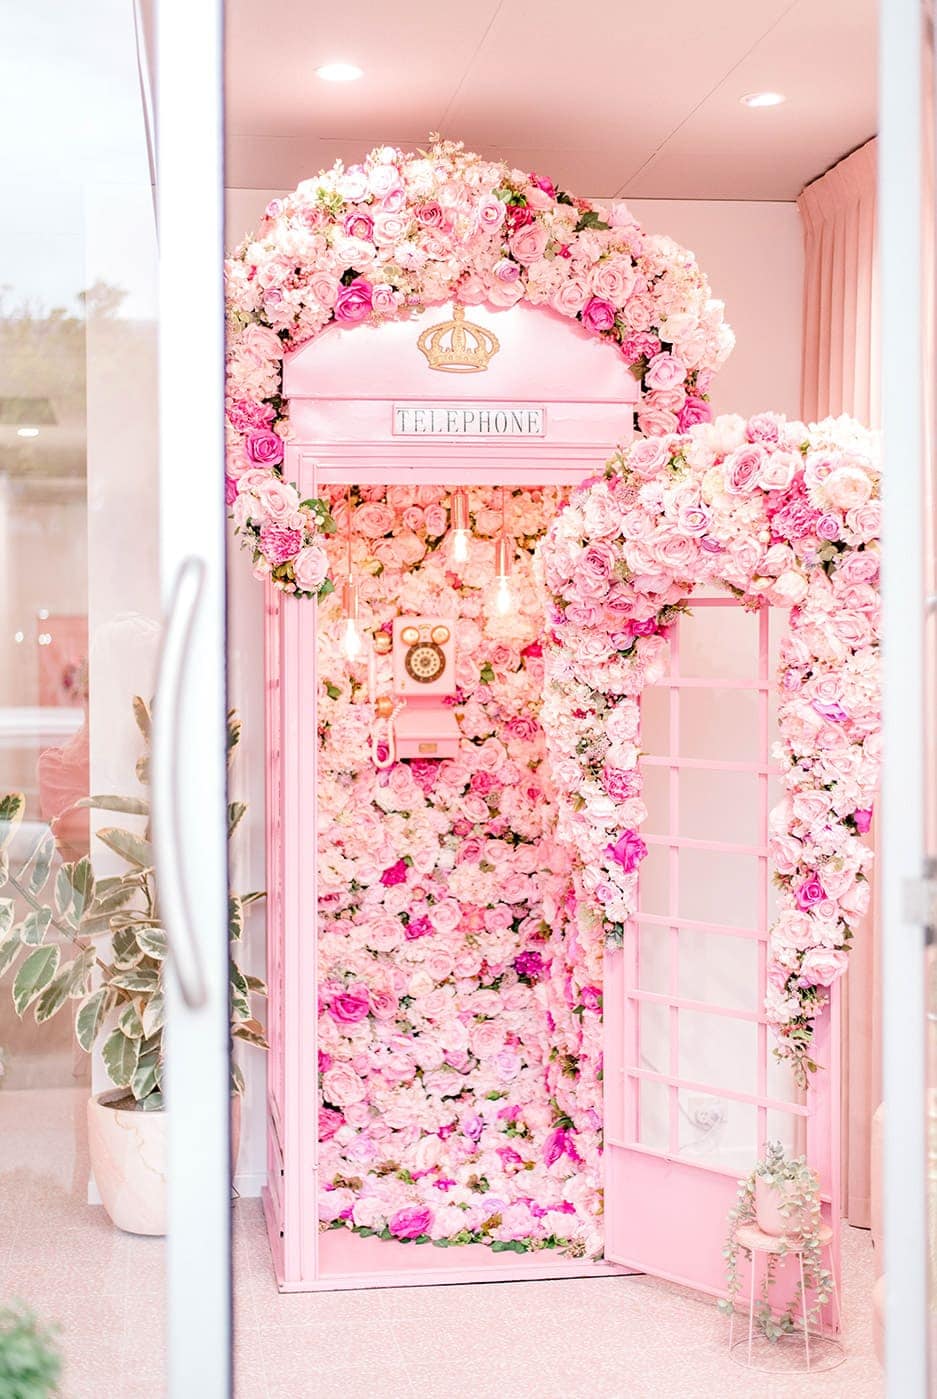 Floral london phone booth